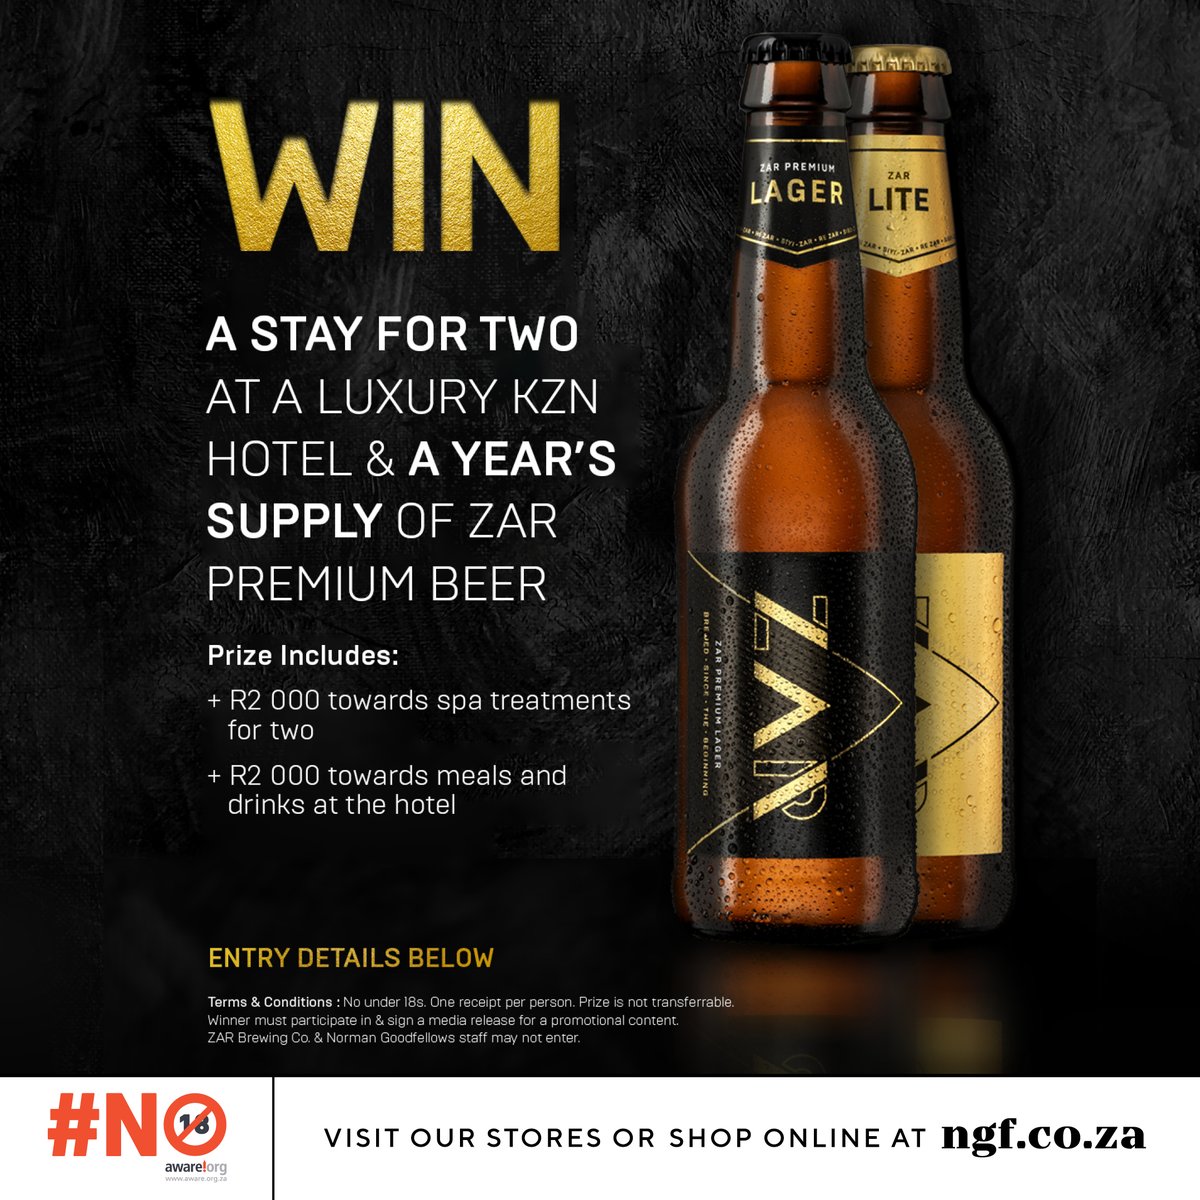 To celebrate the partnership between @ZarBrewingCo and @normangoodfello, we are giving you the chance to win an amazing stay for 2 at a luxury KZN hotel and a year’s supply of ZAR Premium Beer. 

Enter here - instagram.com/p/CpP-x9XqDiP/…

#WeAreZAR #NGF #SandtonSun #ZARPremiumLager